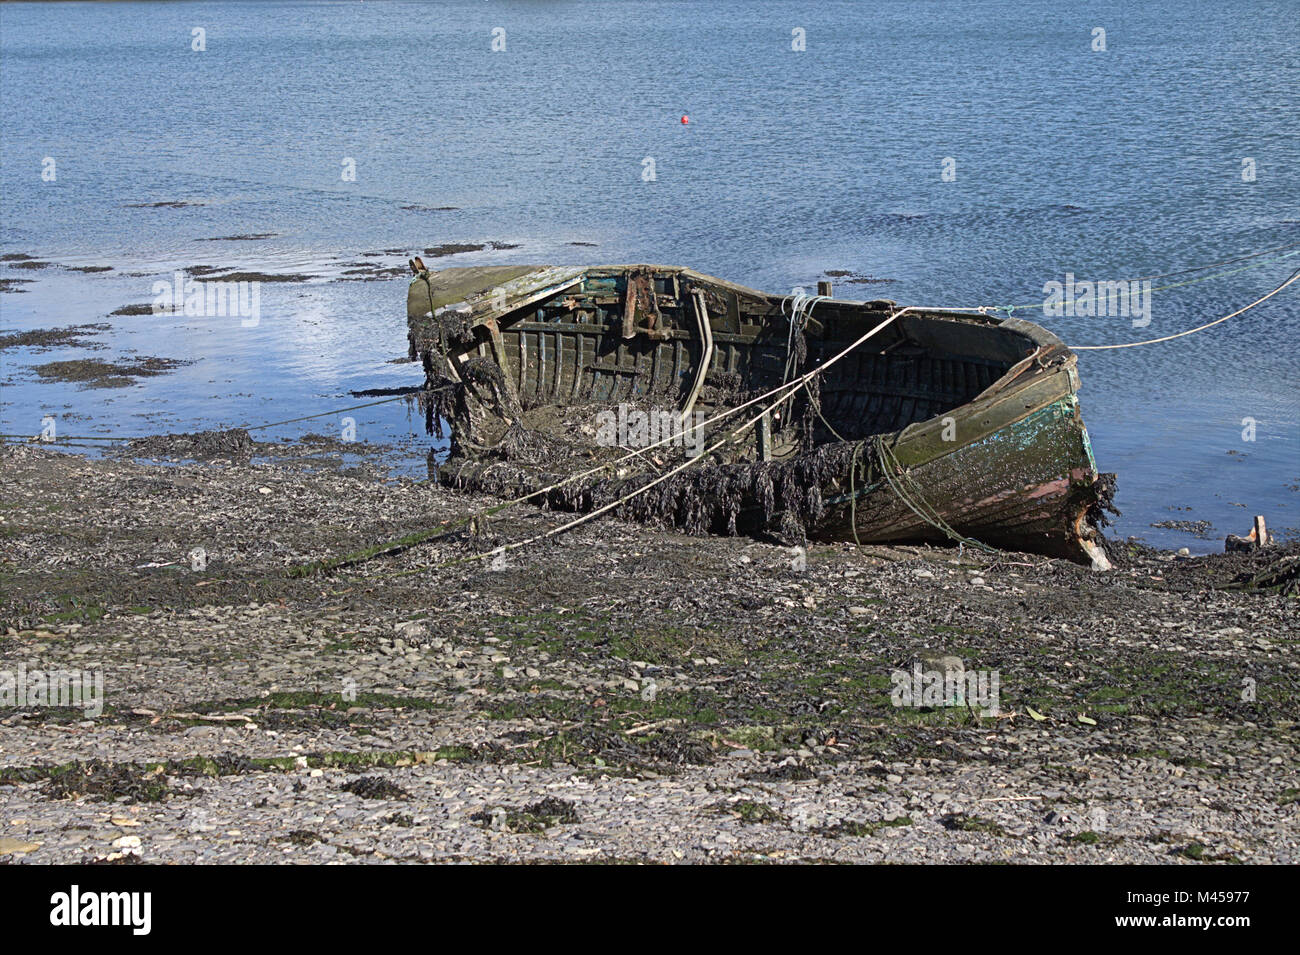 Badly Wrecked wooden fishing boat abandoned covered in sea weed and rotting away on the beach. Stock Photo